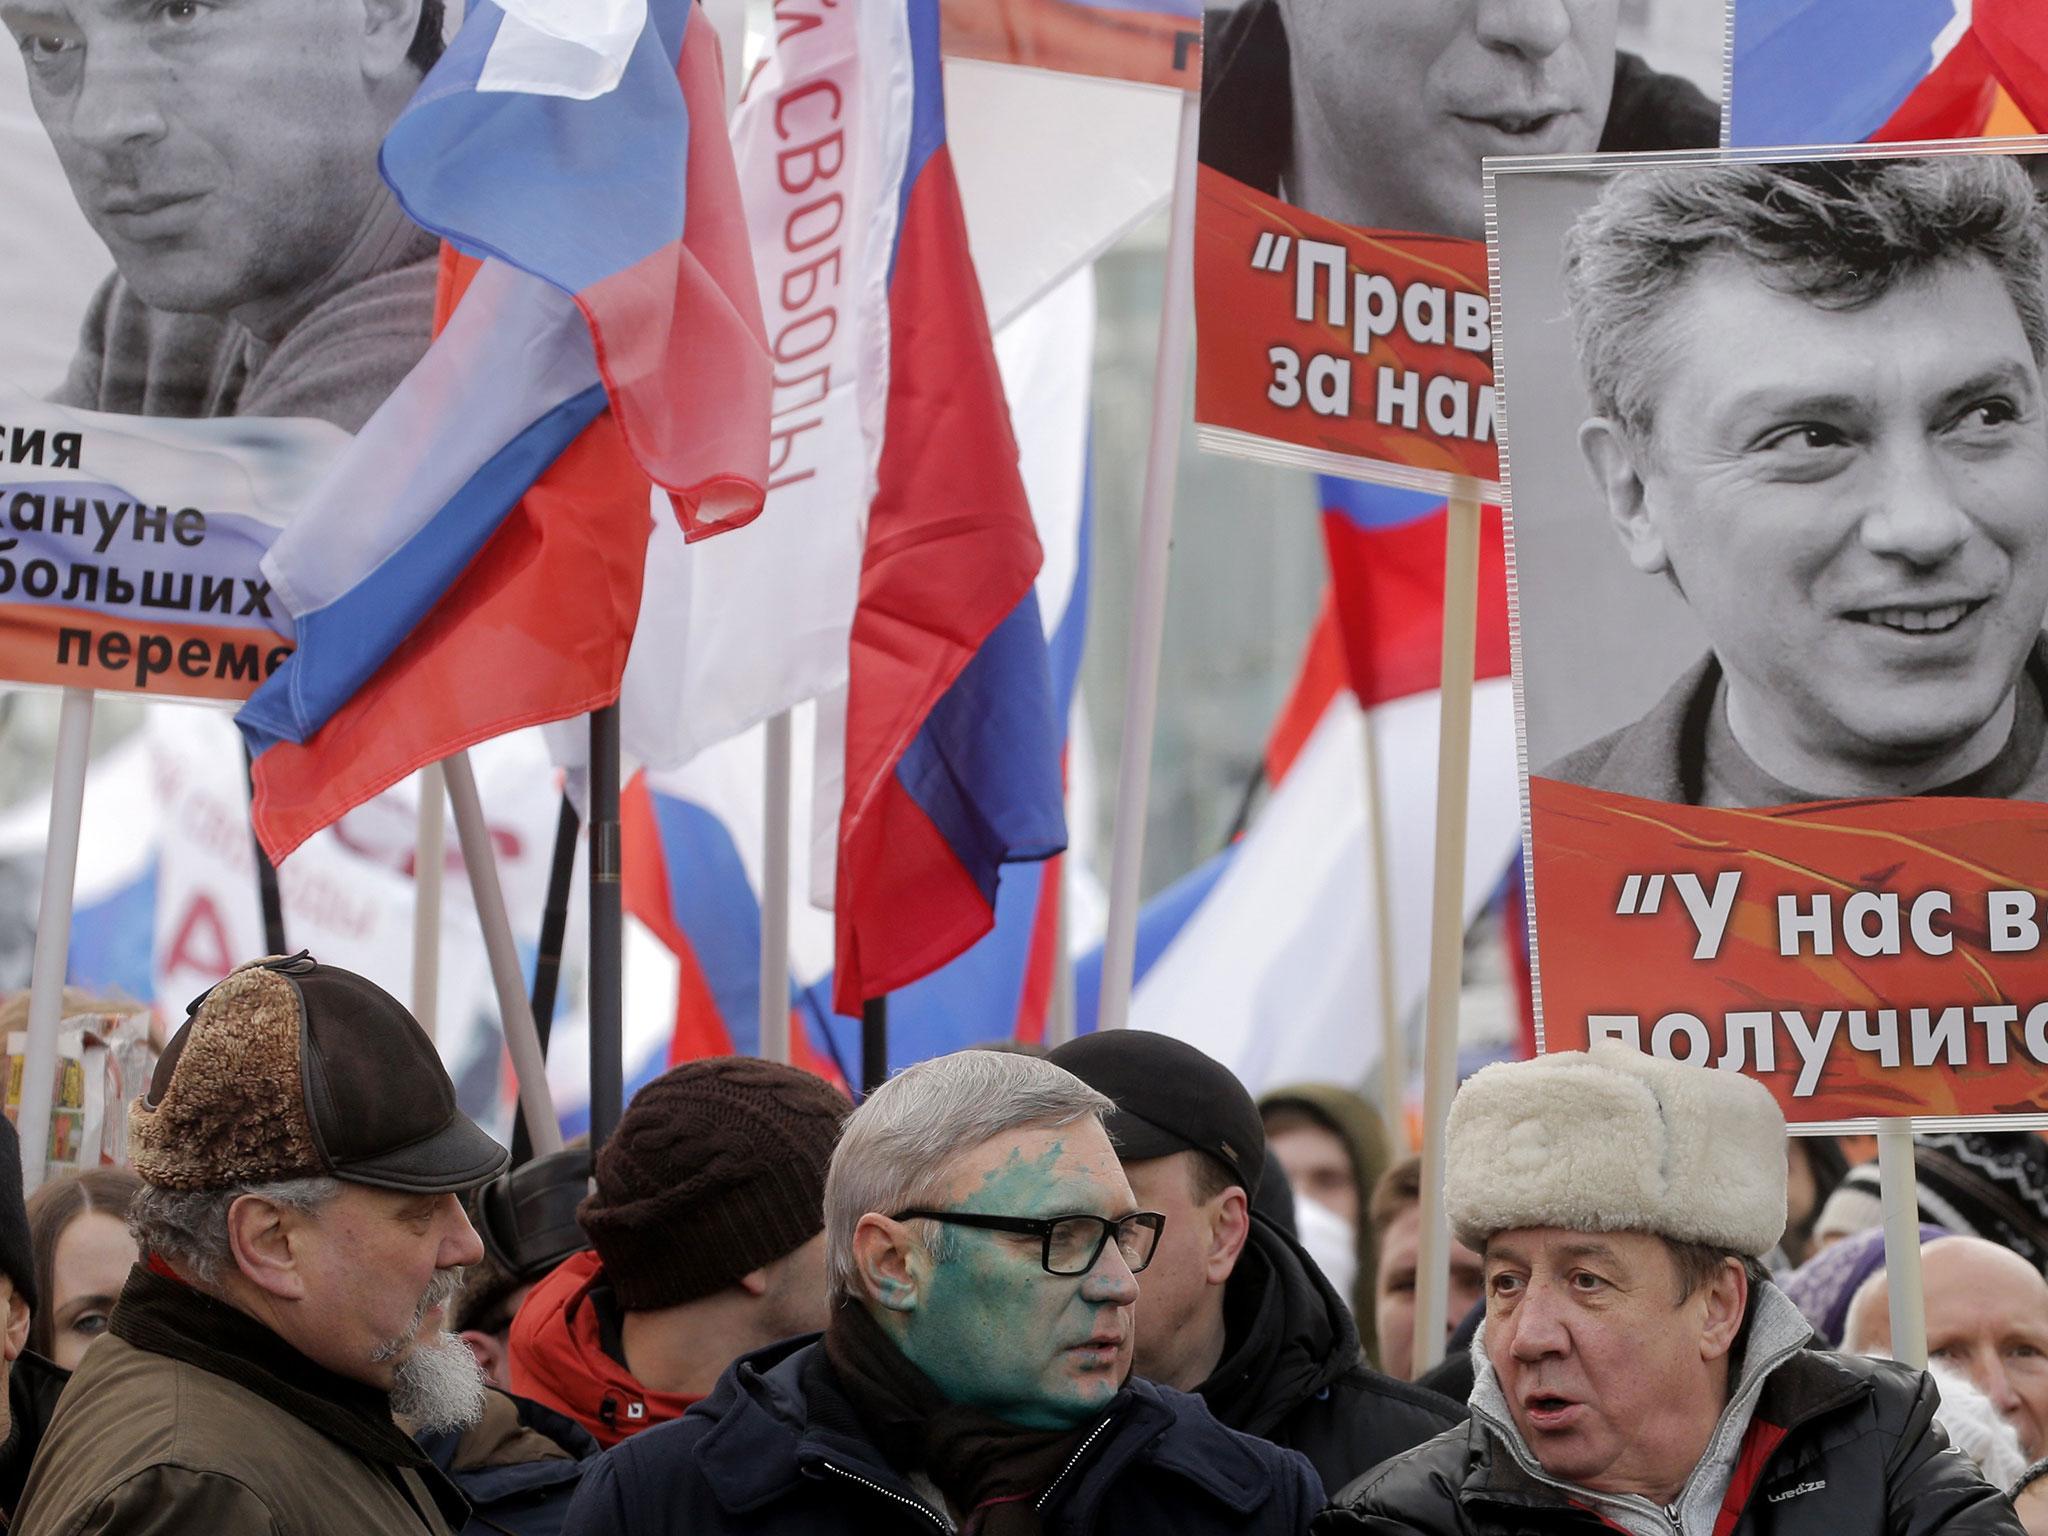 Thousands march in Moscow to remember murdered opposition leader